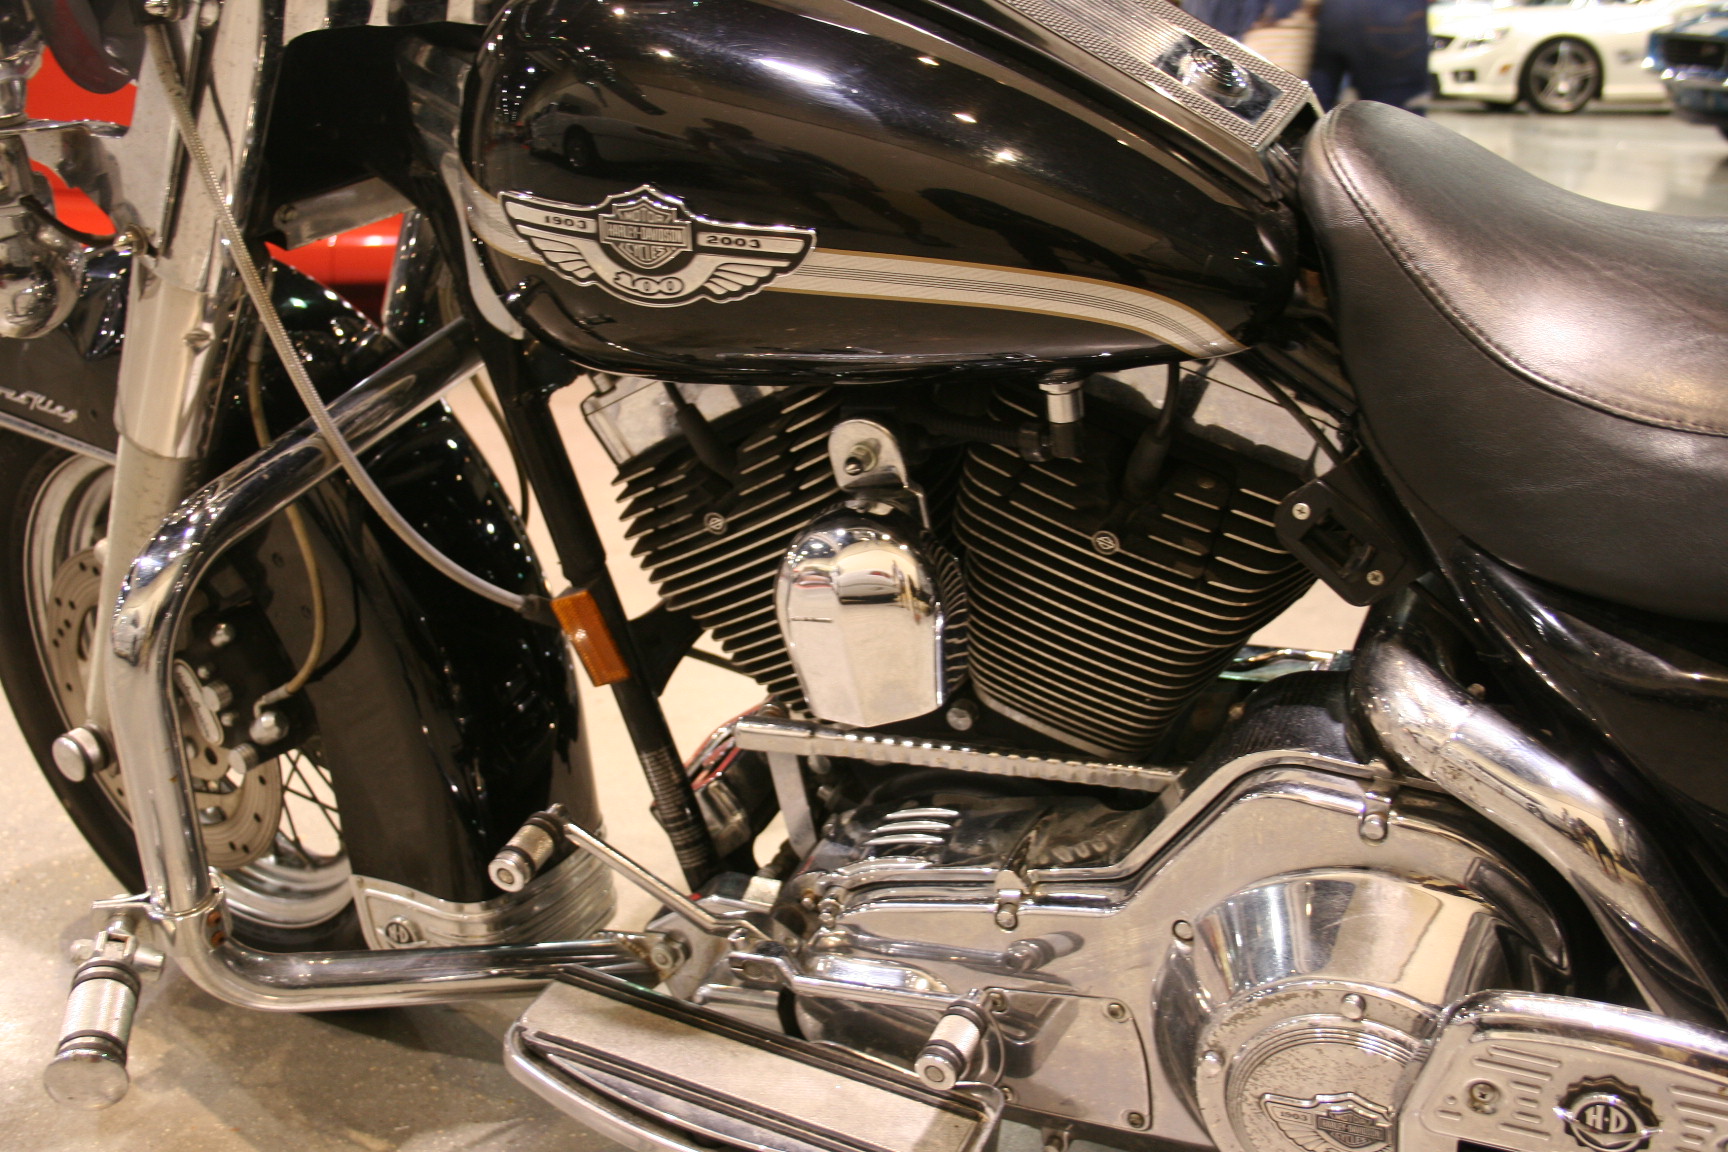 5th Image of a 2003 HARLEY-DAVIDSON FLHRCI